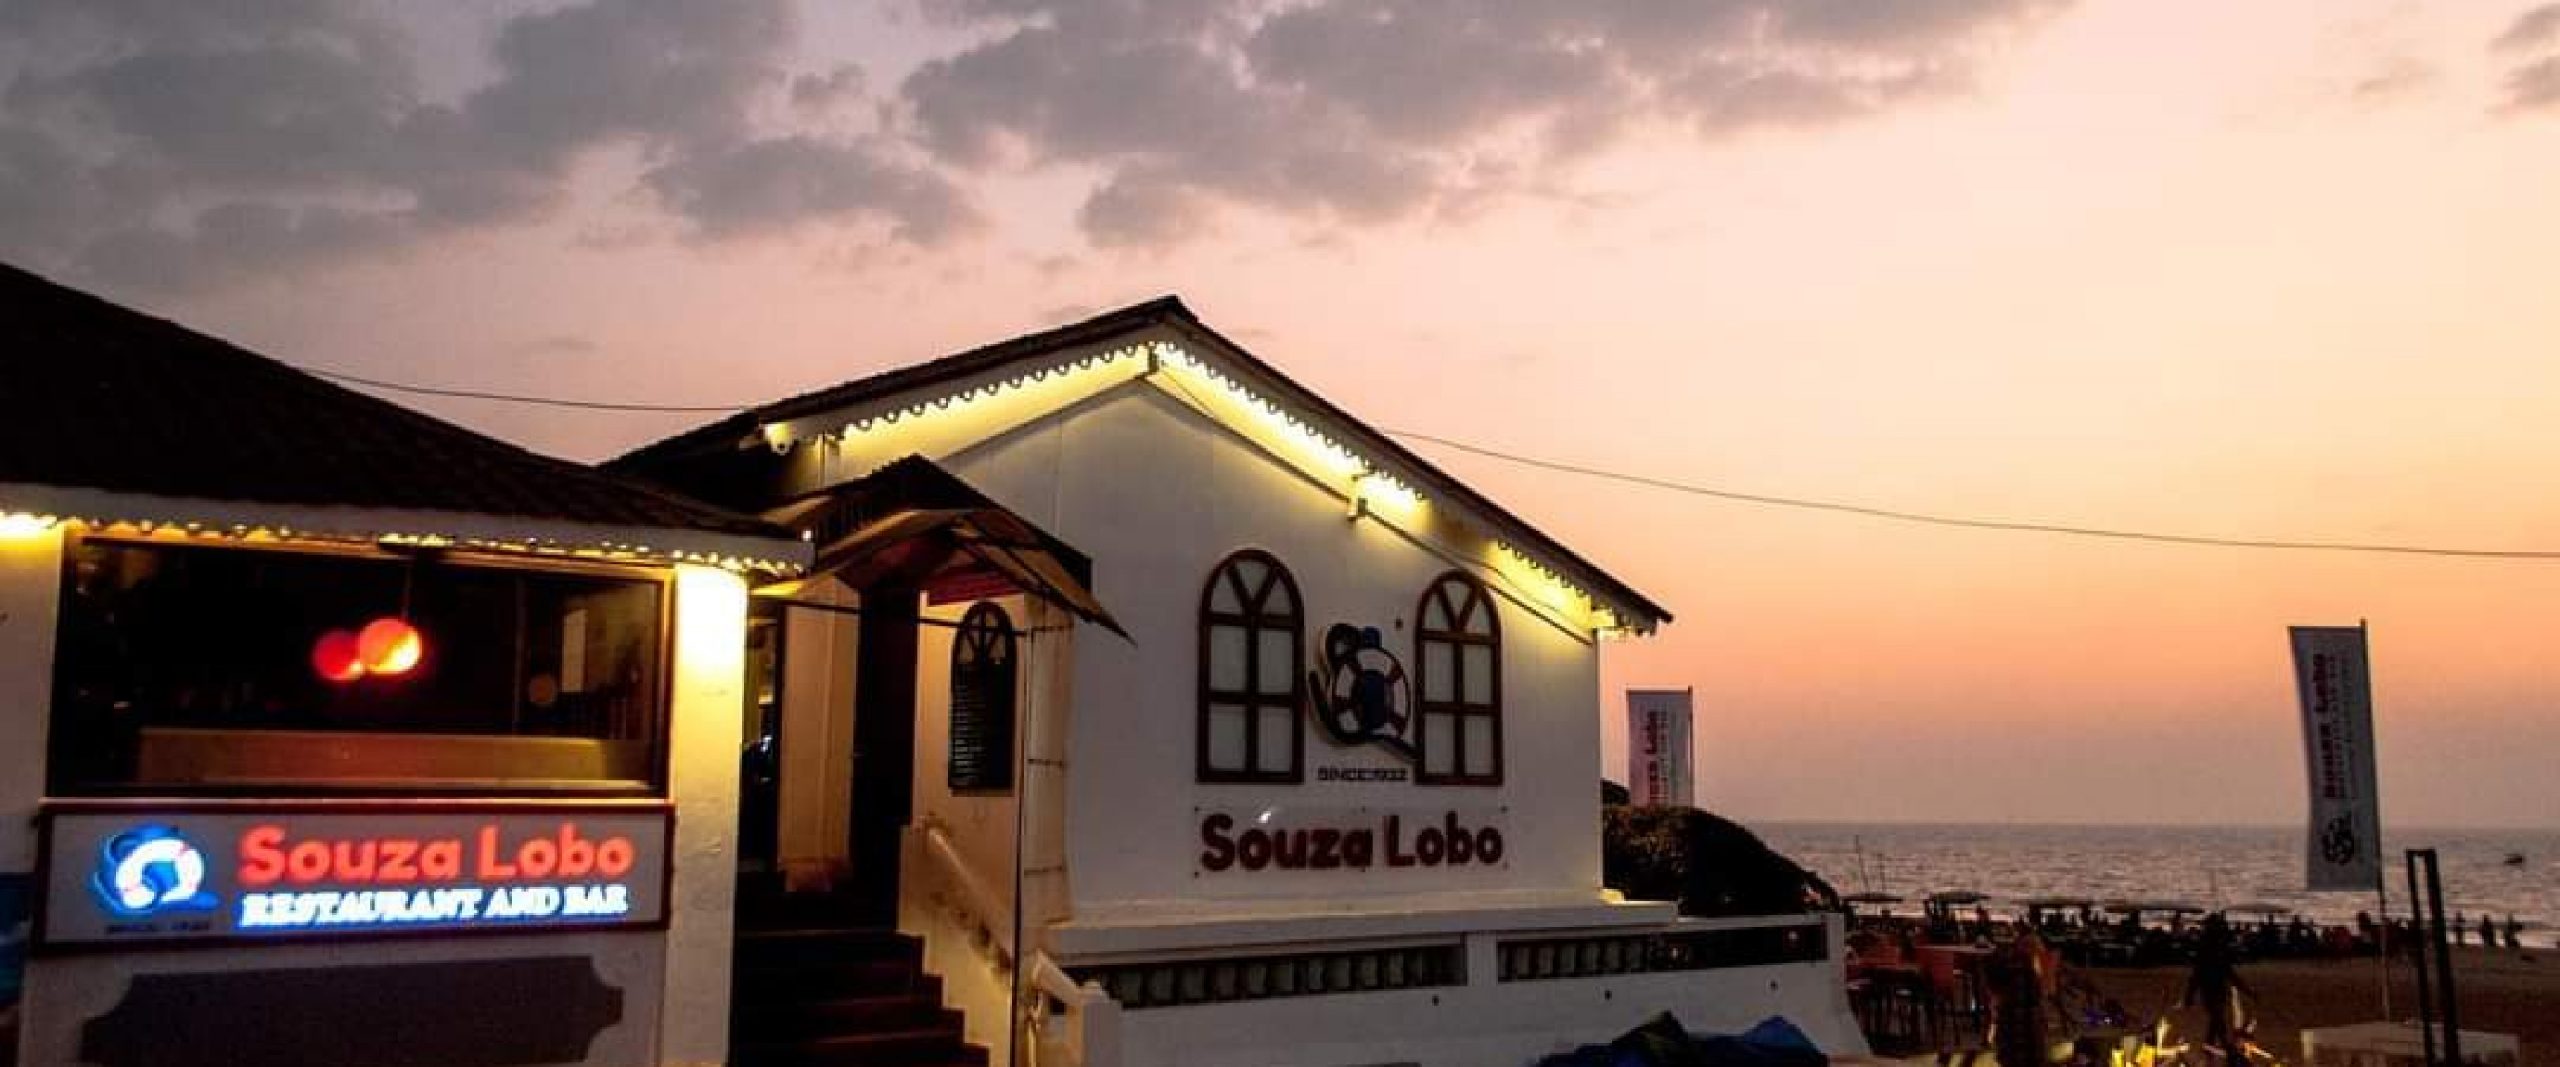 Souza Lobo is commemorating 90 years of excellence!